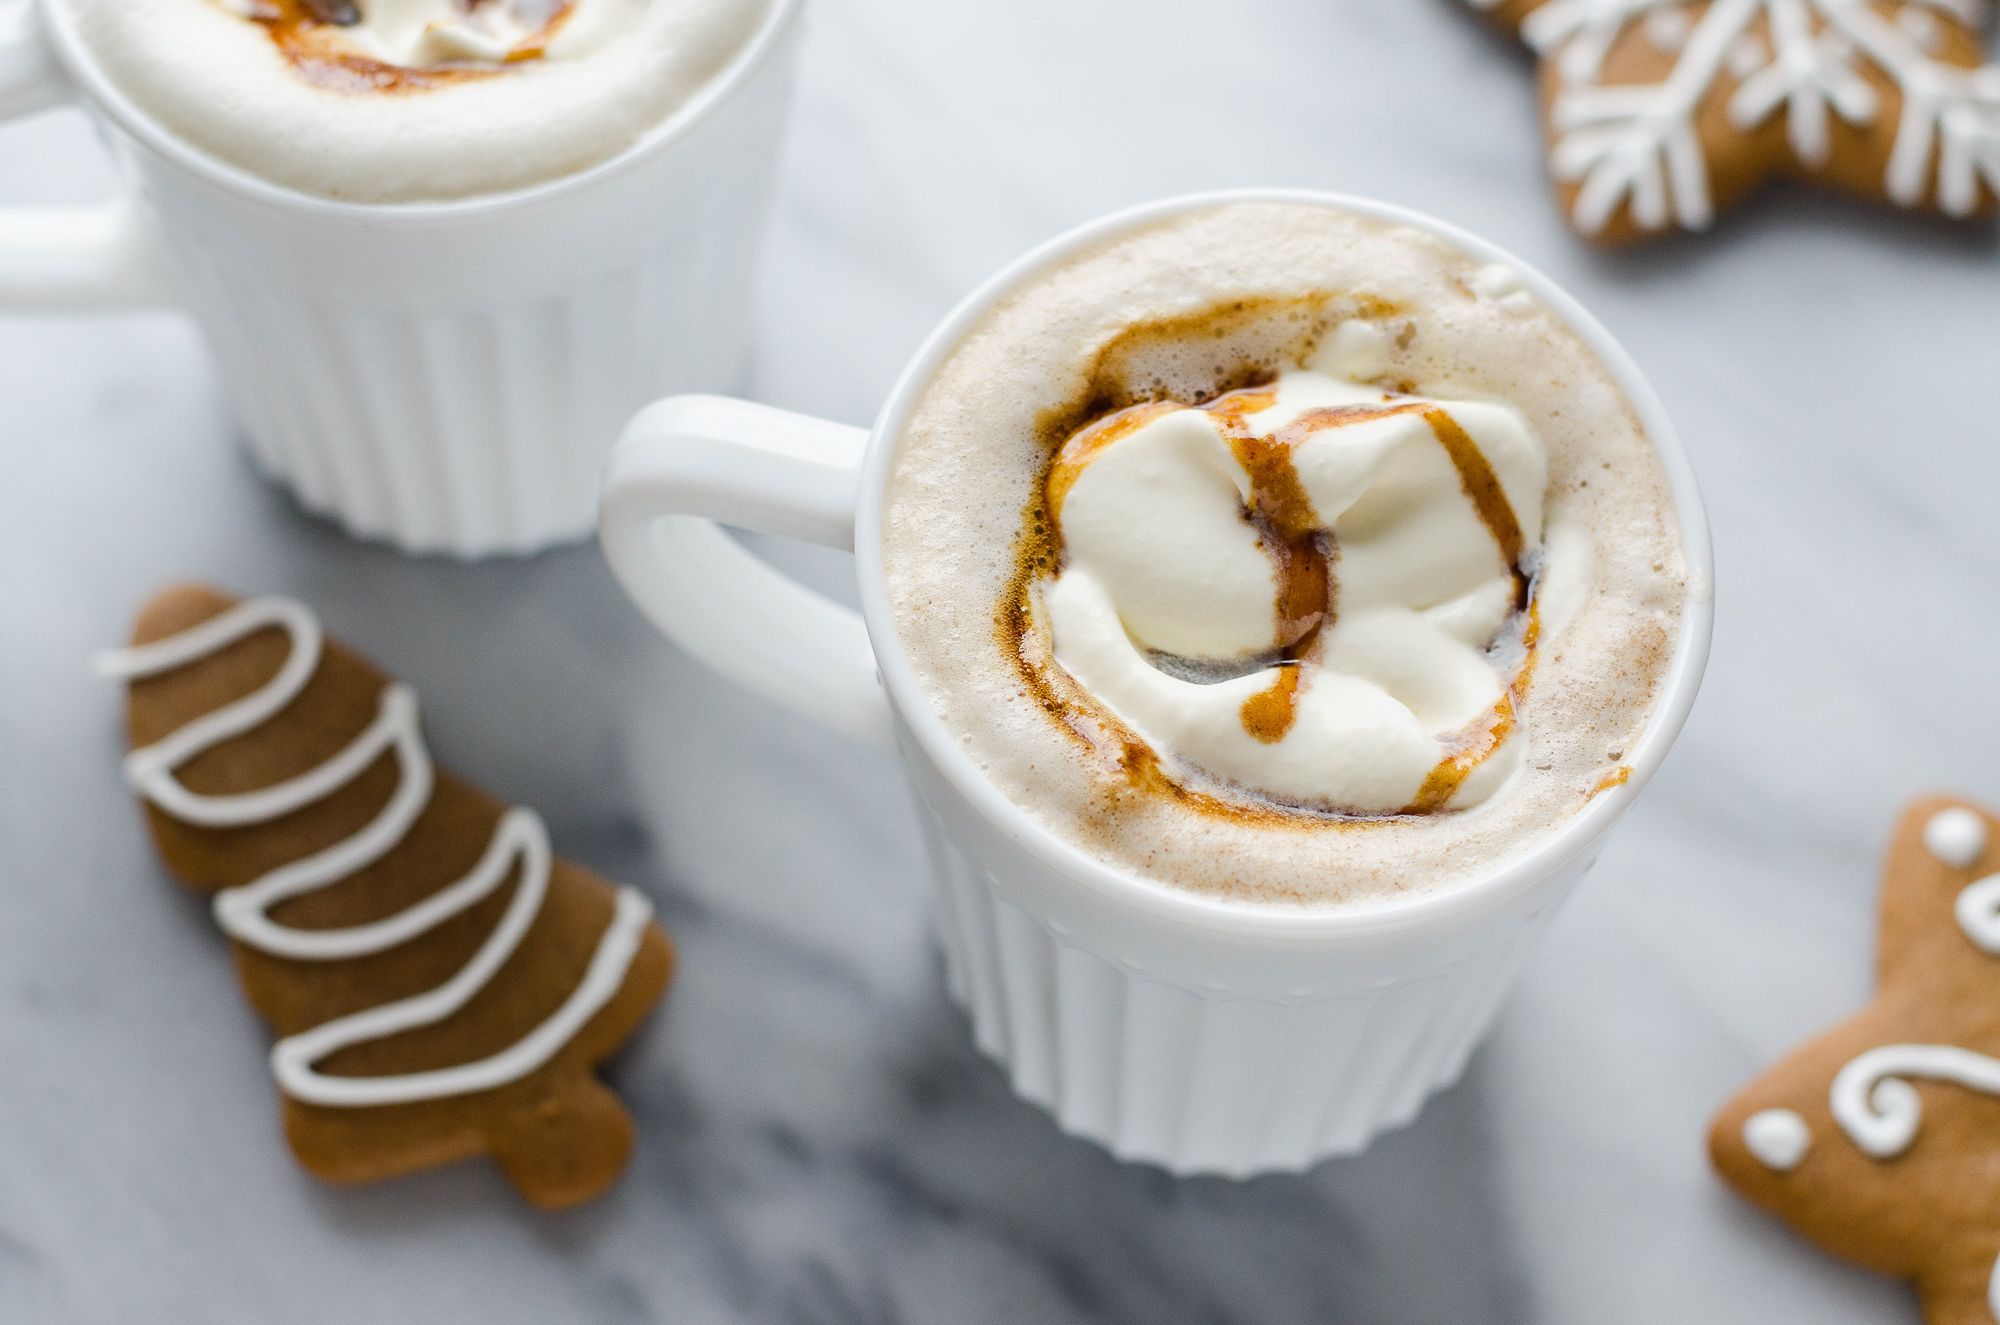 Easy and Tasty Homemade Gingerbread Latte